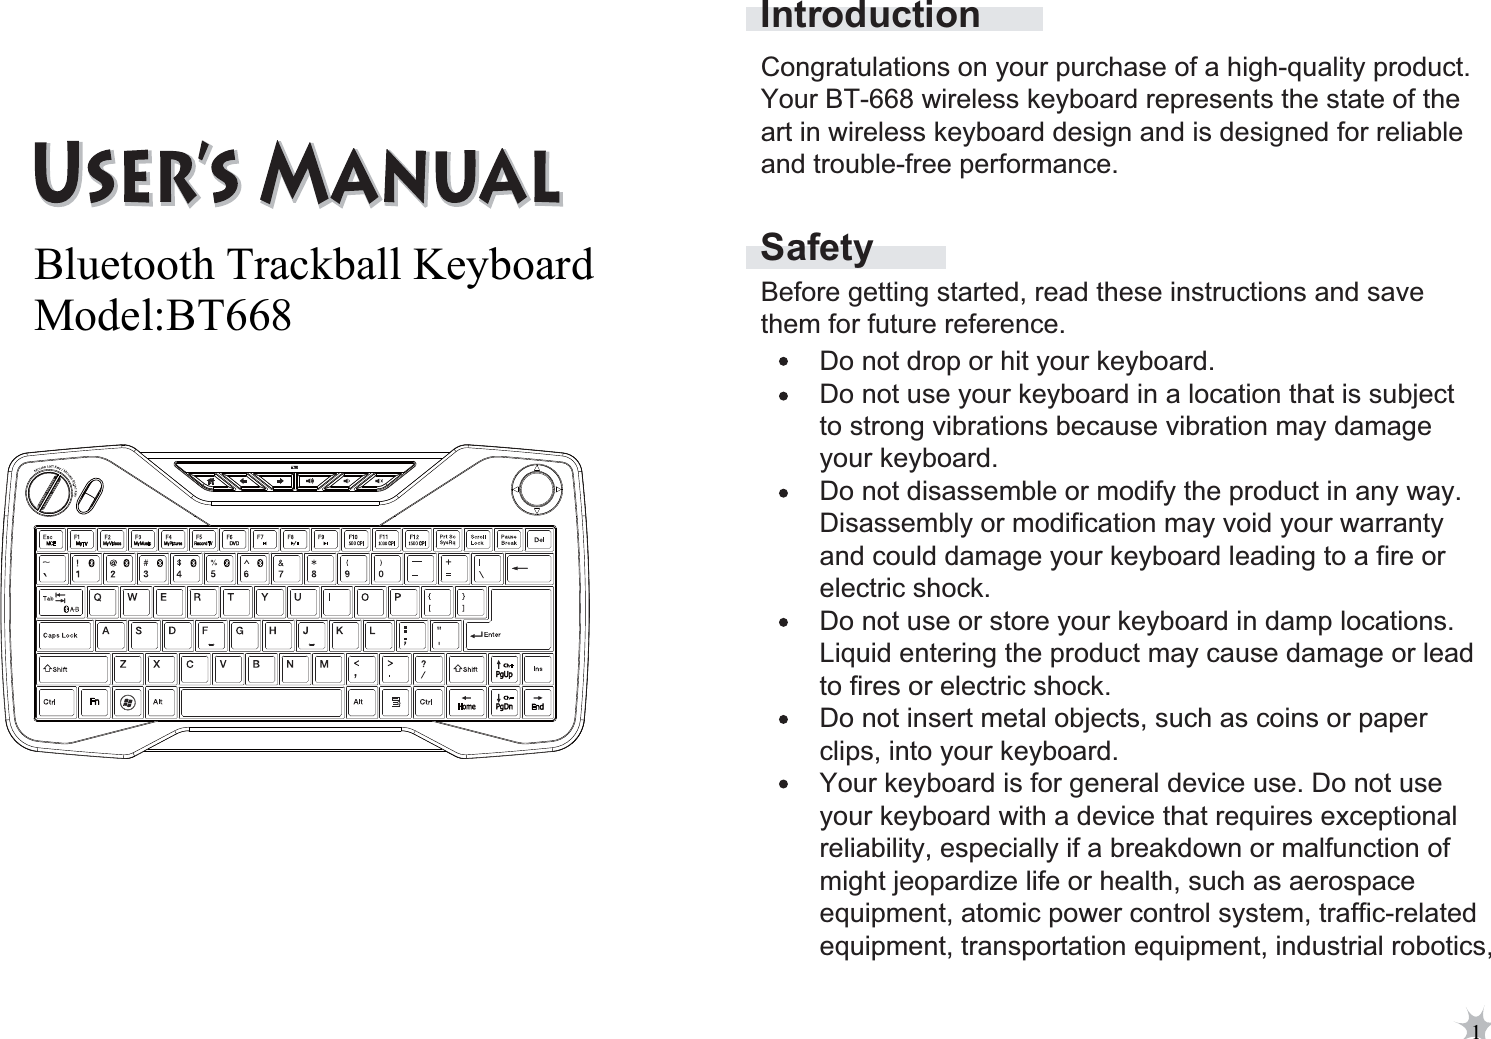 SafetyIntroductionBefore getting started, read these instructions and save them for future reference.Do not drop or hit your keyboard. Do not use your keyboard in a location that is subject to strong vibrations because vibration may damage your keyboard. Do not disassemble or modify the product in any way. Disassembly or modification may void your warranty and could damage your keyboard leading to a fire or electric shock. Do not use or store your keyboard in damp locations.Liquid entering the product may cause damage or lead to fires or electric shock. Do not insert metal objects, such as coins or paper clips, into your keyboard. Your keyboard is for general device use. Do not use your keyboard with a device that requires exceptional reliability, especially if a breakdown or malfunction of might jeopardize life or health, such as aerospace equipment, atomic power control system, traffic-relatedequipment, transportation equipment, industrial robotics,Congratulations on your purchase of a high-quality product. Your BT-668 wireless keyboard represents the state of the art in wireless keyboard design and is designed for reliable and trouble-free performance. 1Bluetooth Trackball Keyboard Model:BT668